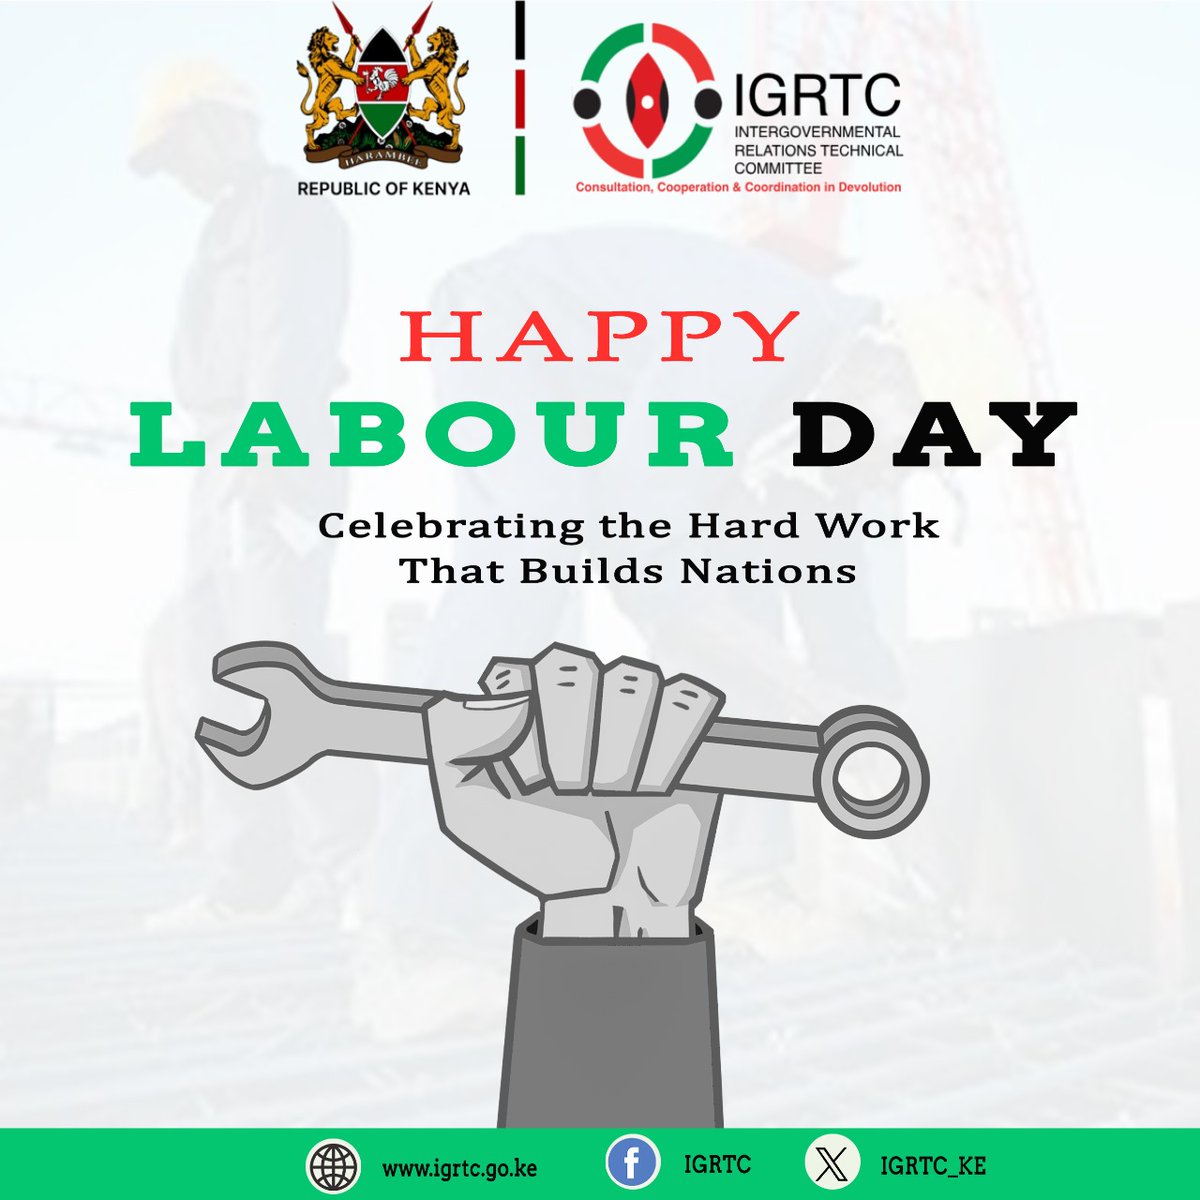 IGRTC wishes you a Happy Labour Day! Let's celebrate the hard work and dedication that powers our Nation forward. #labourday